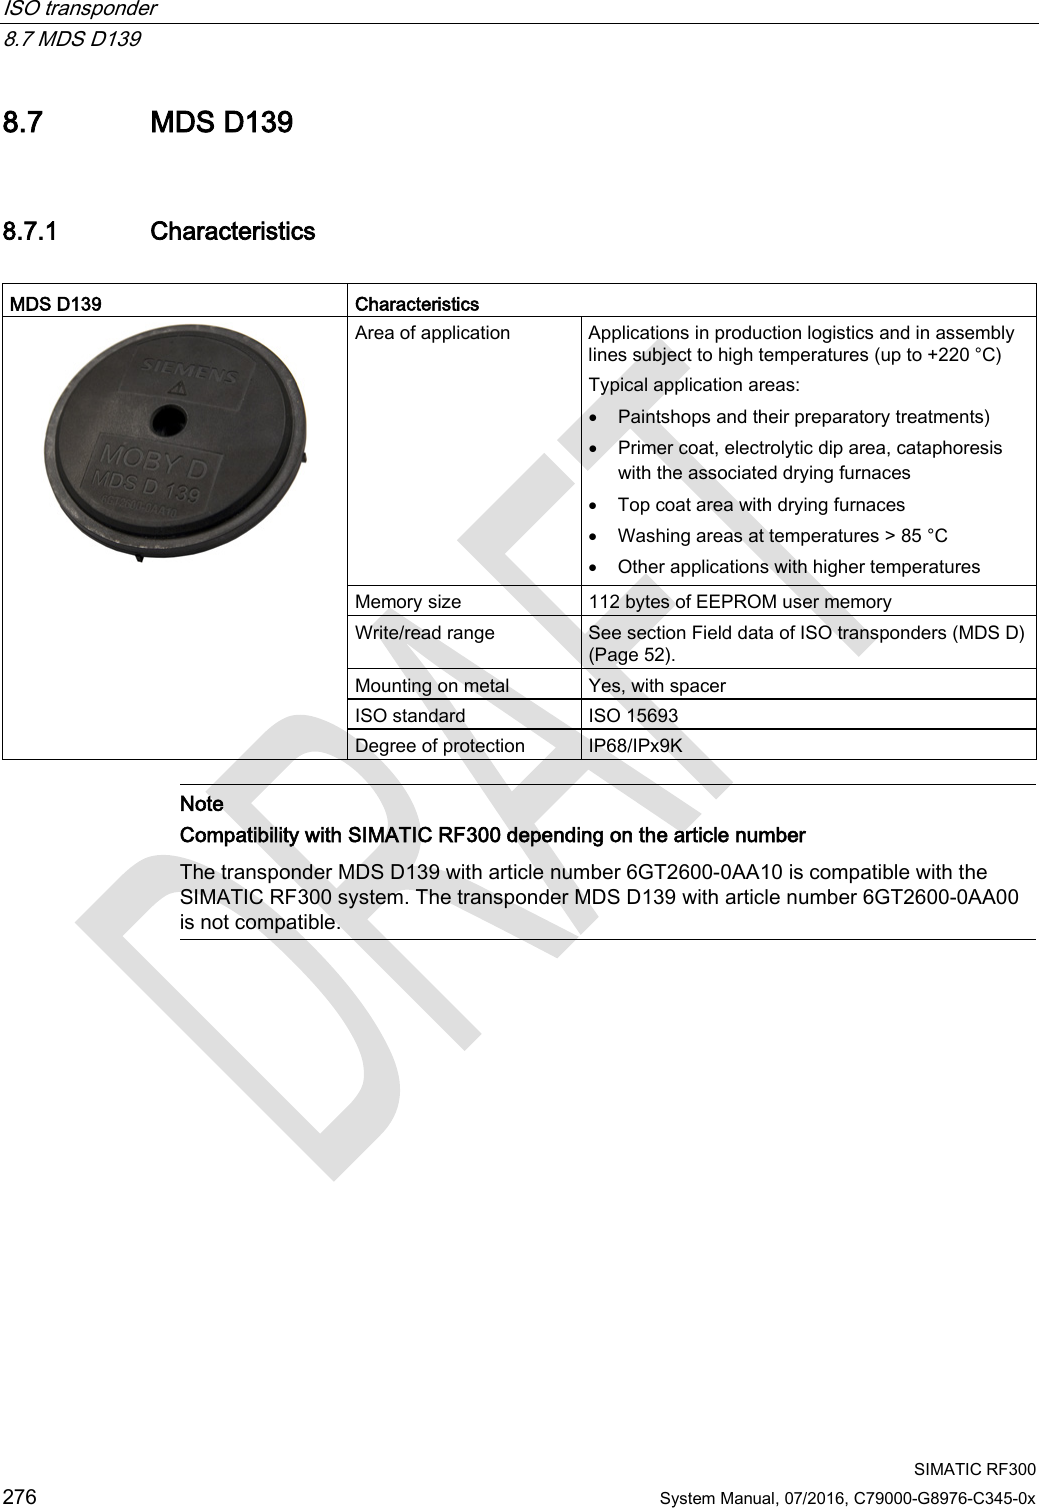 ISO transponder   8.7 MDS D139  SIMATIC RF300 276 System Manual, 07/2016, C79000-G8976-C345-0x 8.7 MDS D139 8.7.1 Characteristics  MDS D139 Characteristics  Area of application Applications in production logistics and in assembly lines subject to high temperatures (up to +220 °C) Typical application areas: • Paintshops and their preparatory treatments) • Primer coat, electrolytic dip area, cataphoresis with the associated drying furnaces • Top coat area with drying furnaces • Washing areas at temperatures &gt; 85 °C • Other applications with higher temperatures Memory size 112 bytes of EEPROM user memory Write/read range See section Field data of ISO transponders (MDS D) (Page 52). Mounting on metal Yes, with spacer ISO standard ISO 15693 Degree of protection IP68/IPx9K   Note Compatibility with SIMATIC RF300 depending on the article number The transponder MDS D139 with article number 6GT2600-0AA10 is compatible with the SIMATIC RF300 system. The transponder MDS D139 with article number 6GT2600-0AA00 is not compatible.  